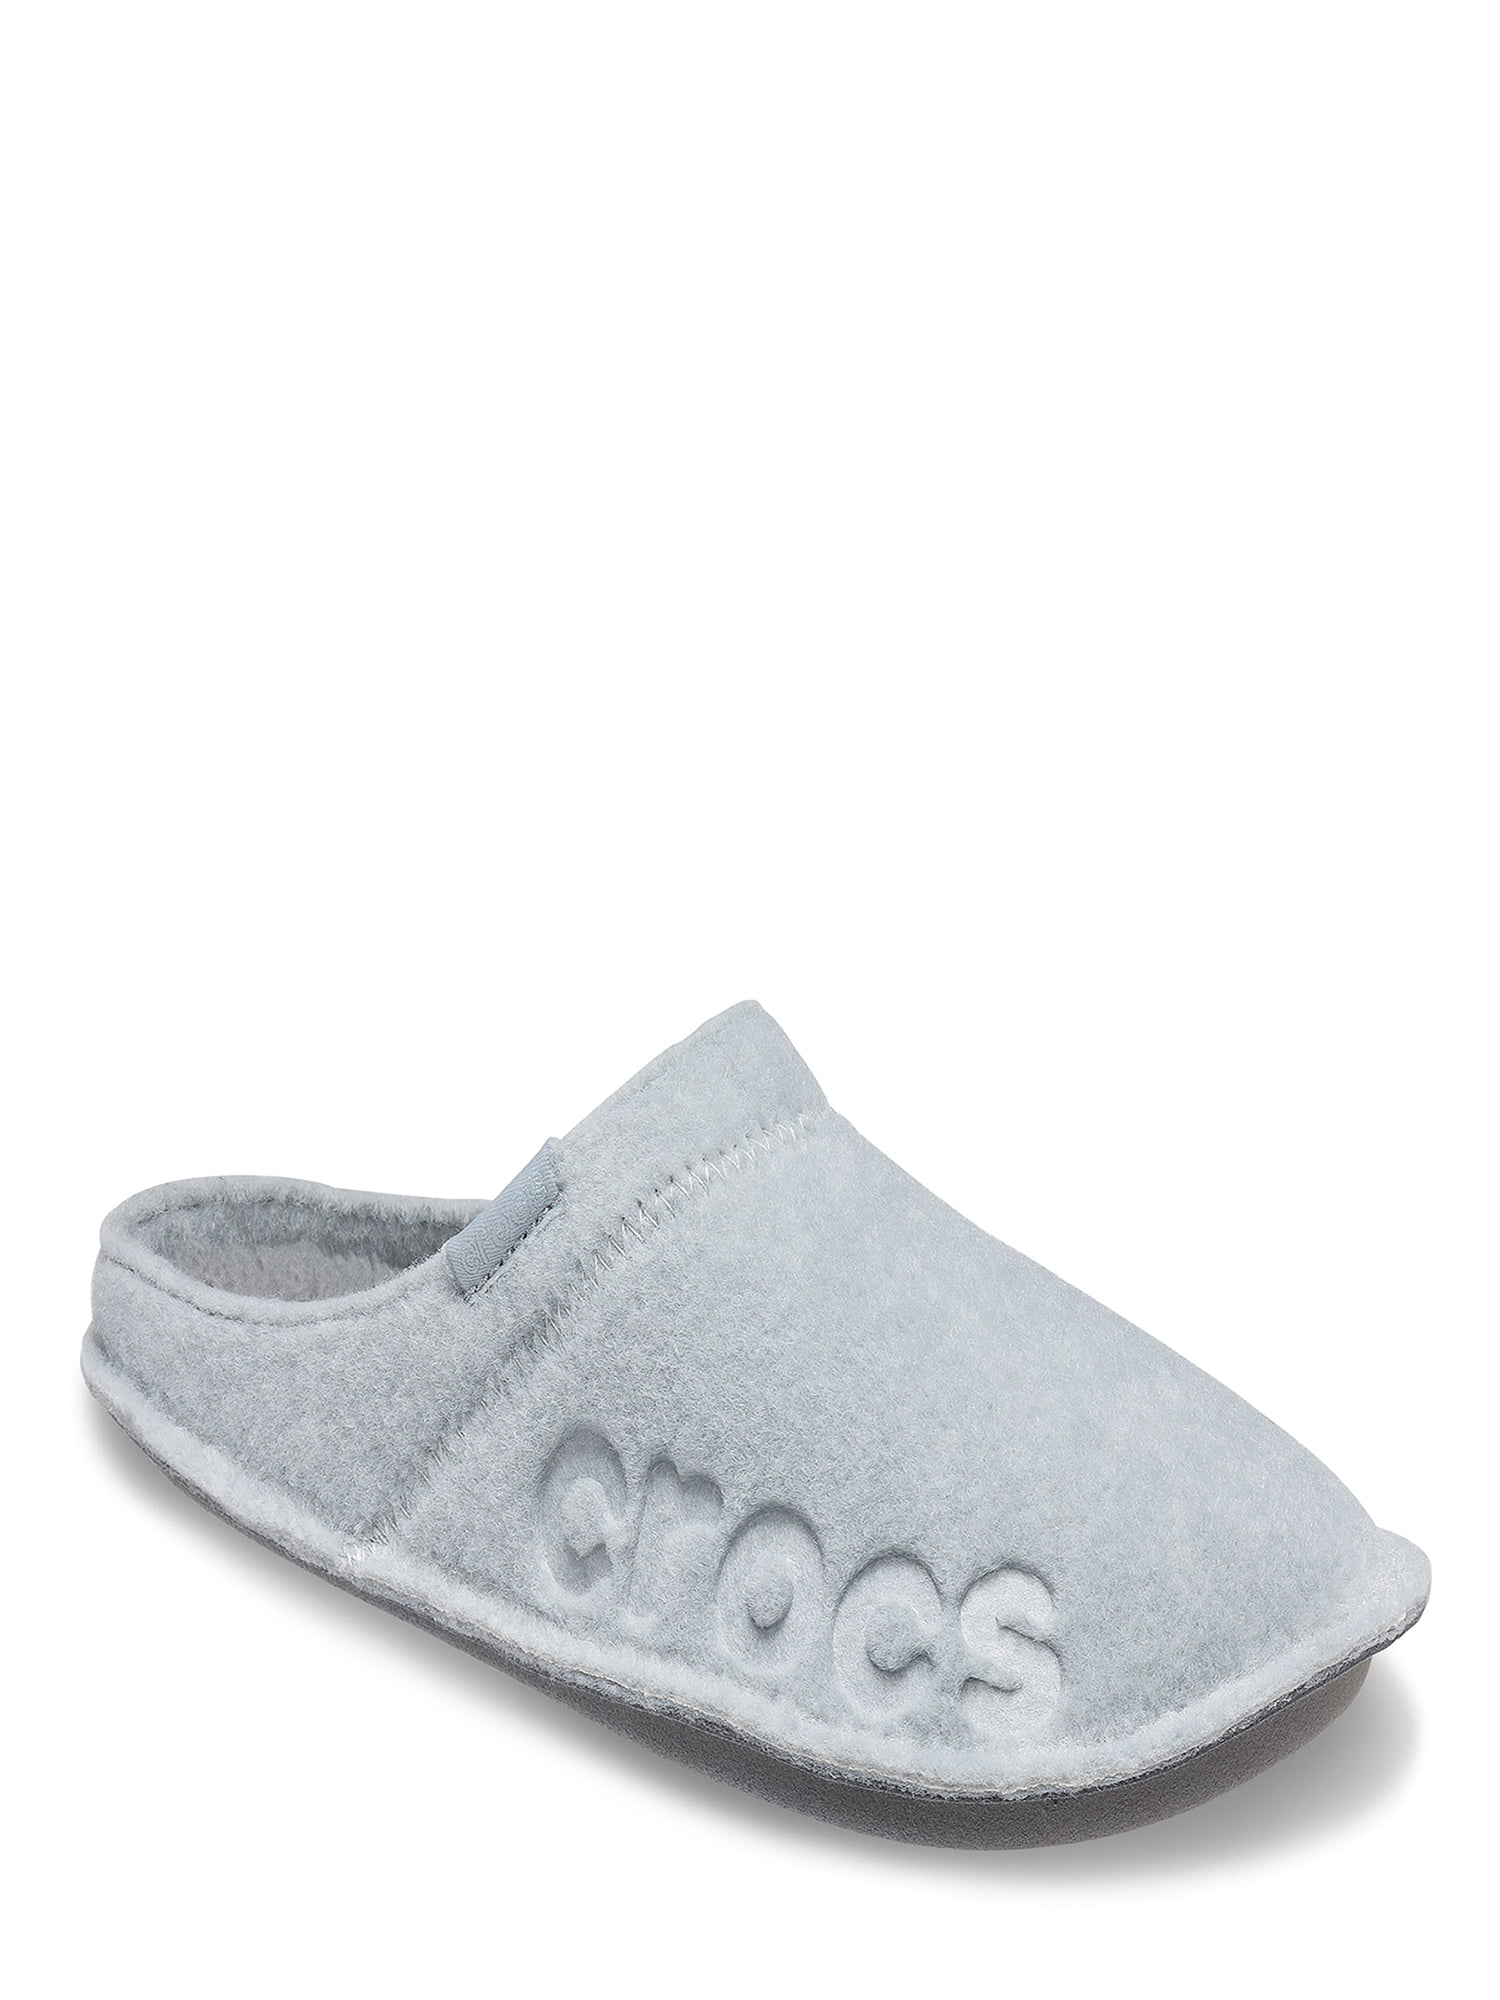 Crocs Slippers Literide in Ikeja - Shoes, Havilah Collections | Ong.ng-saigonsouth.com.vn